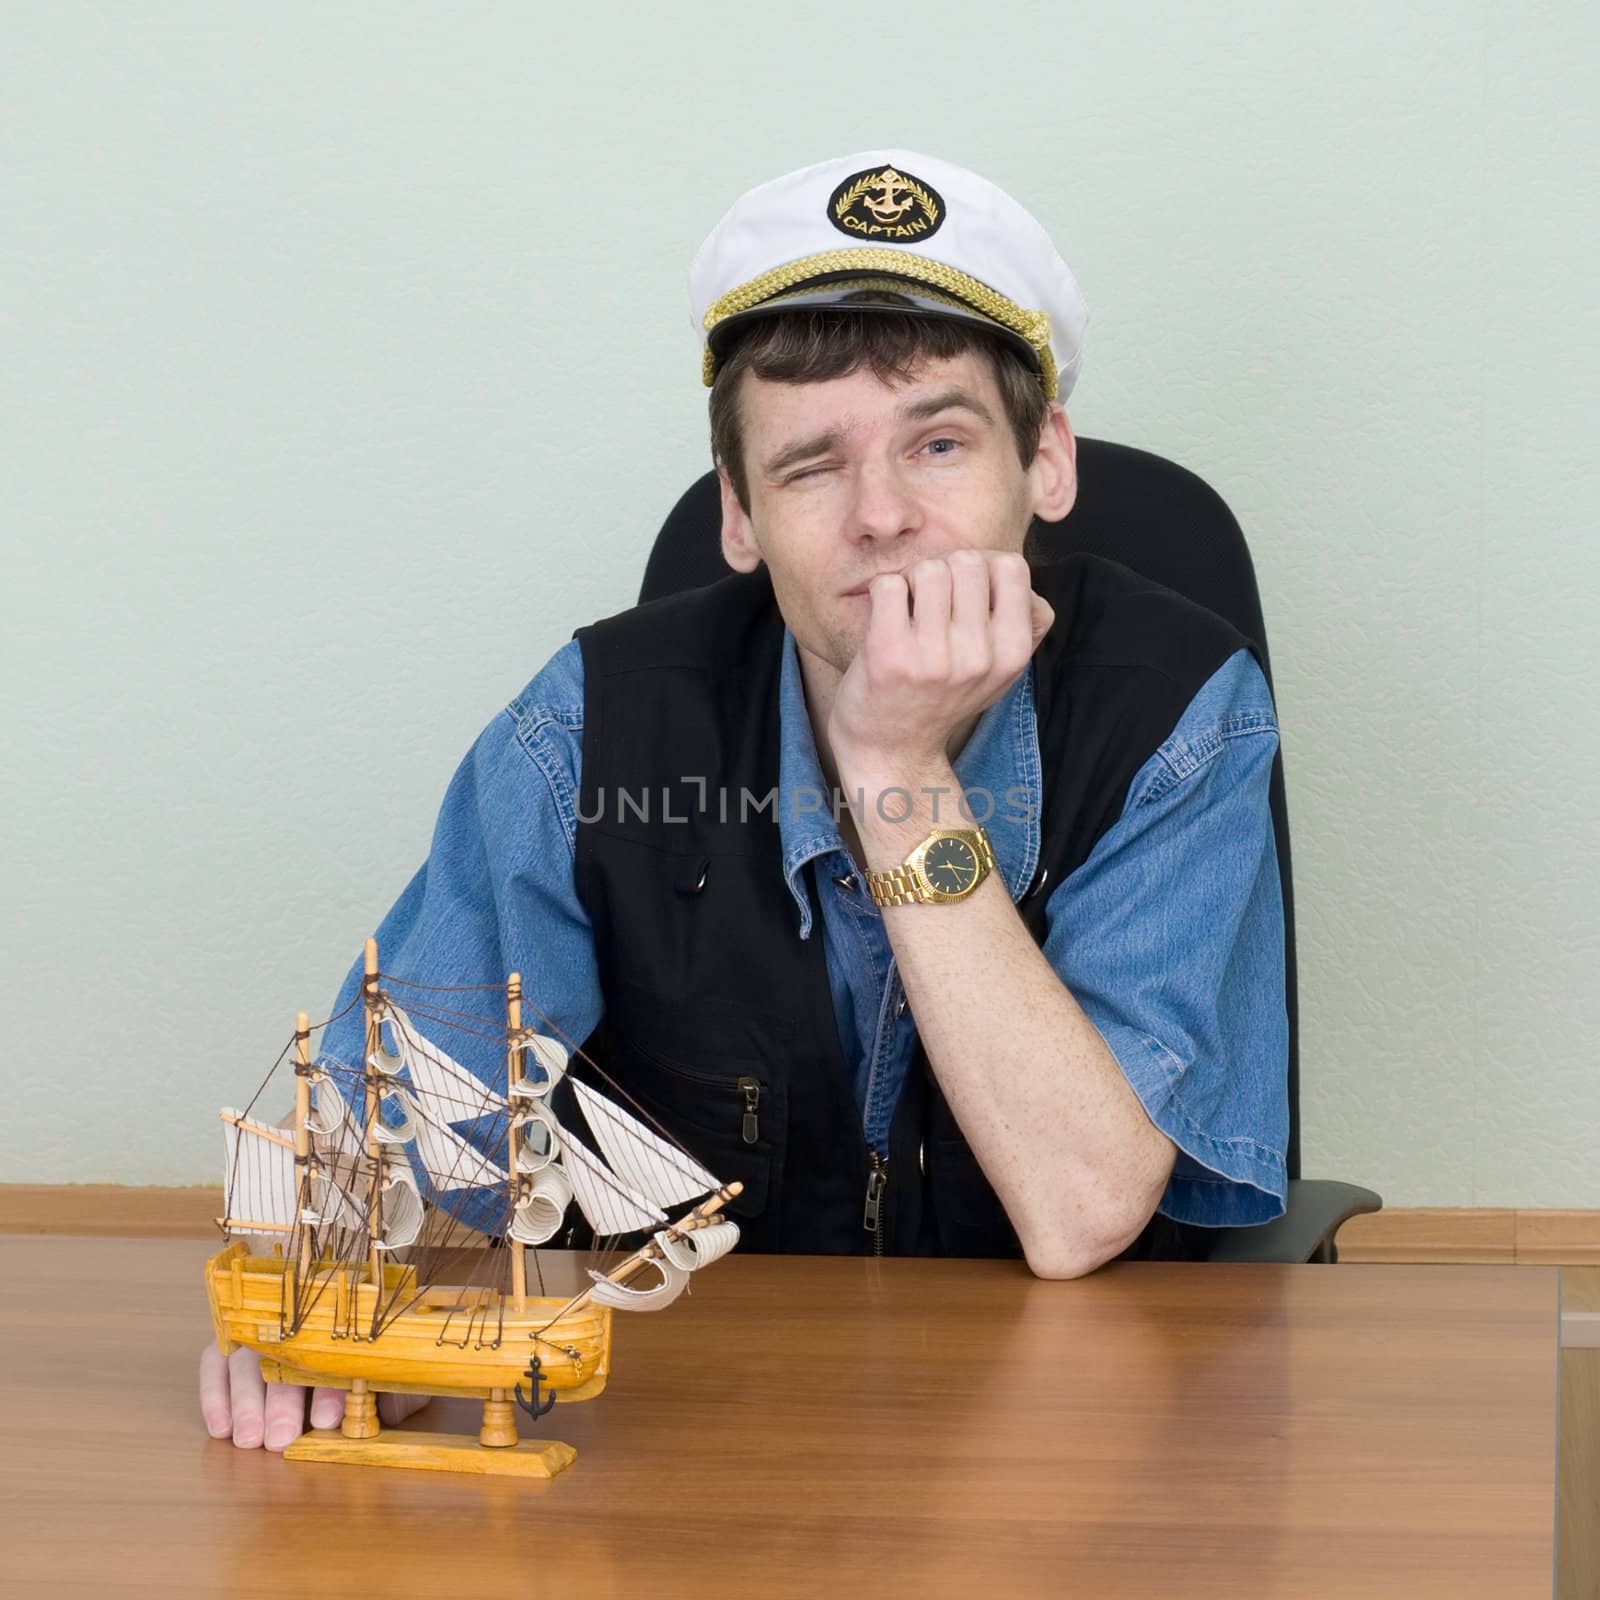 Man in a uniform cap at table with model of ship